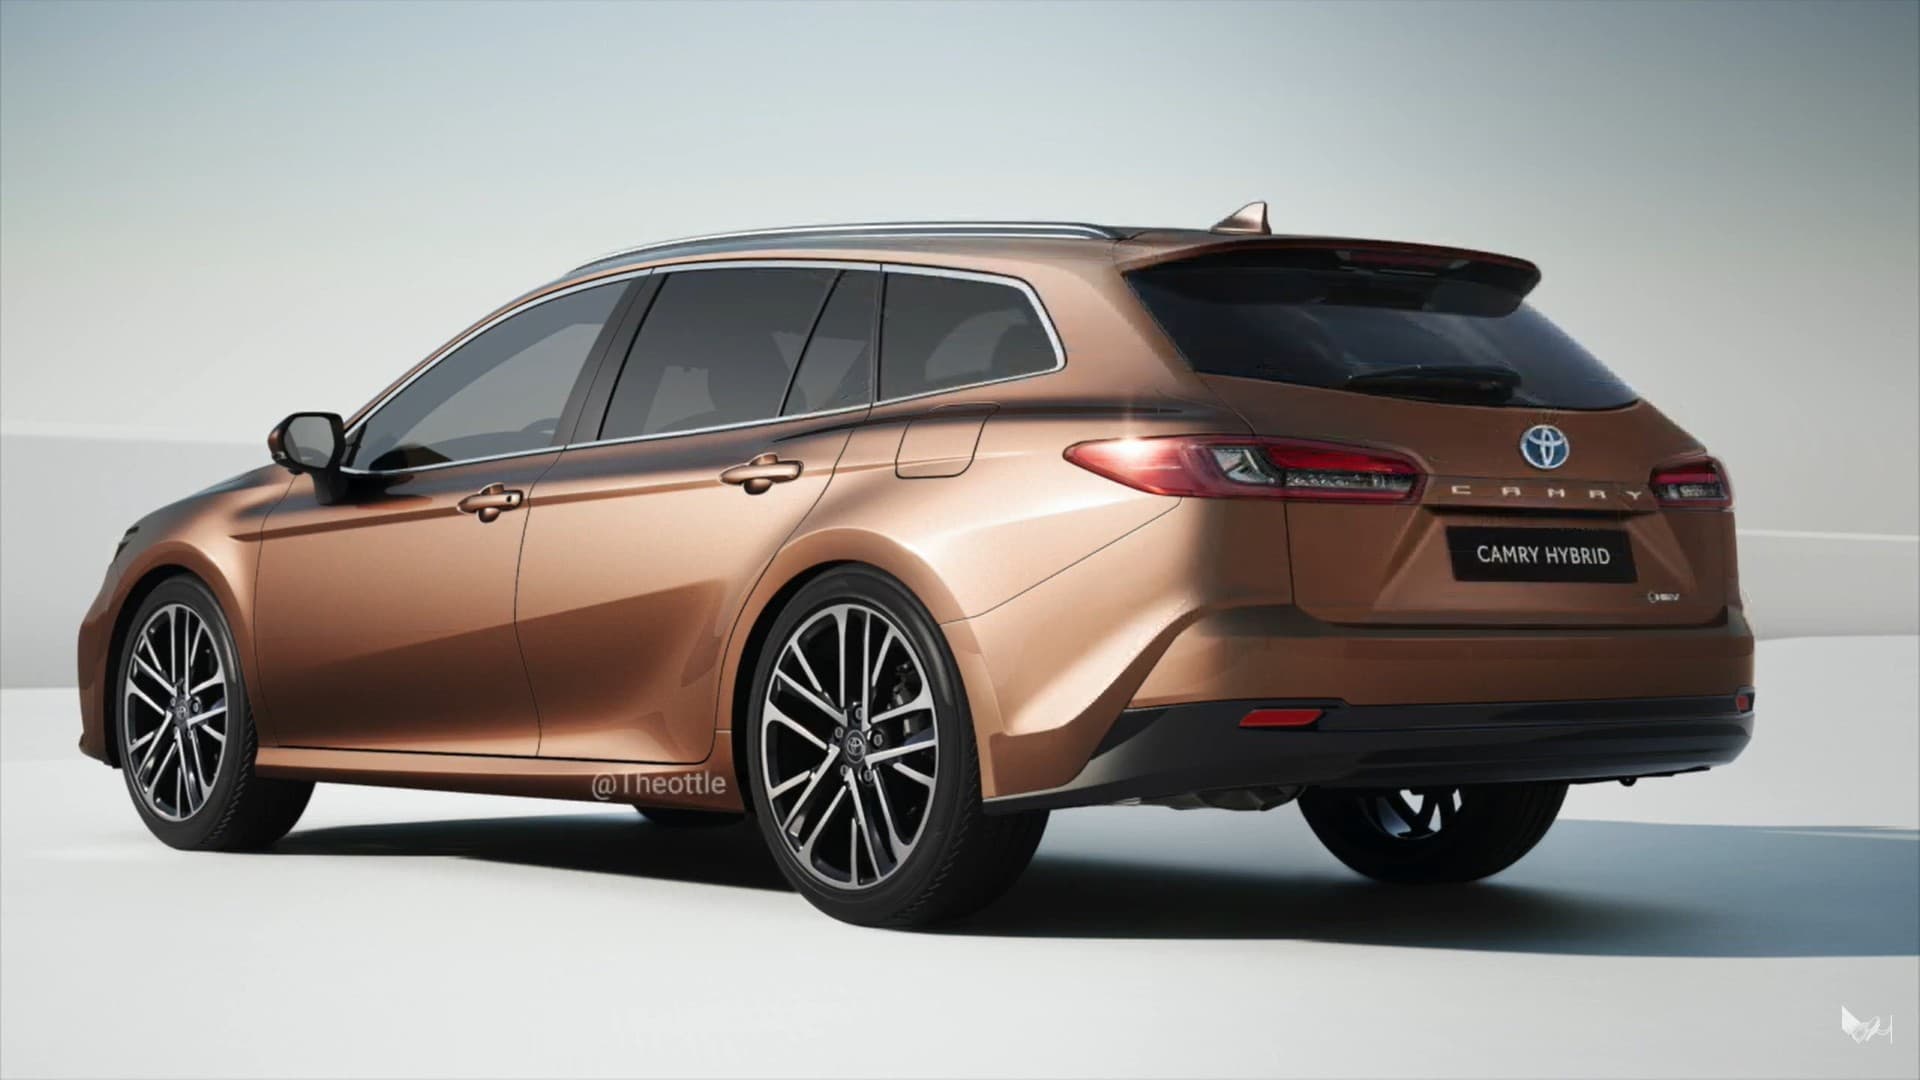 2025 toyota camry welcomes back the station wagon option at least in fantasy land 15